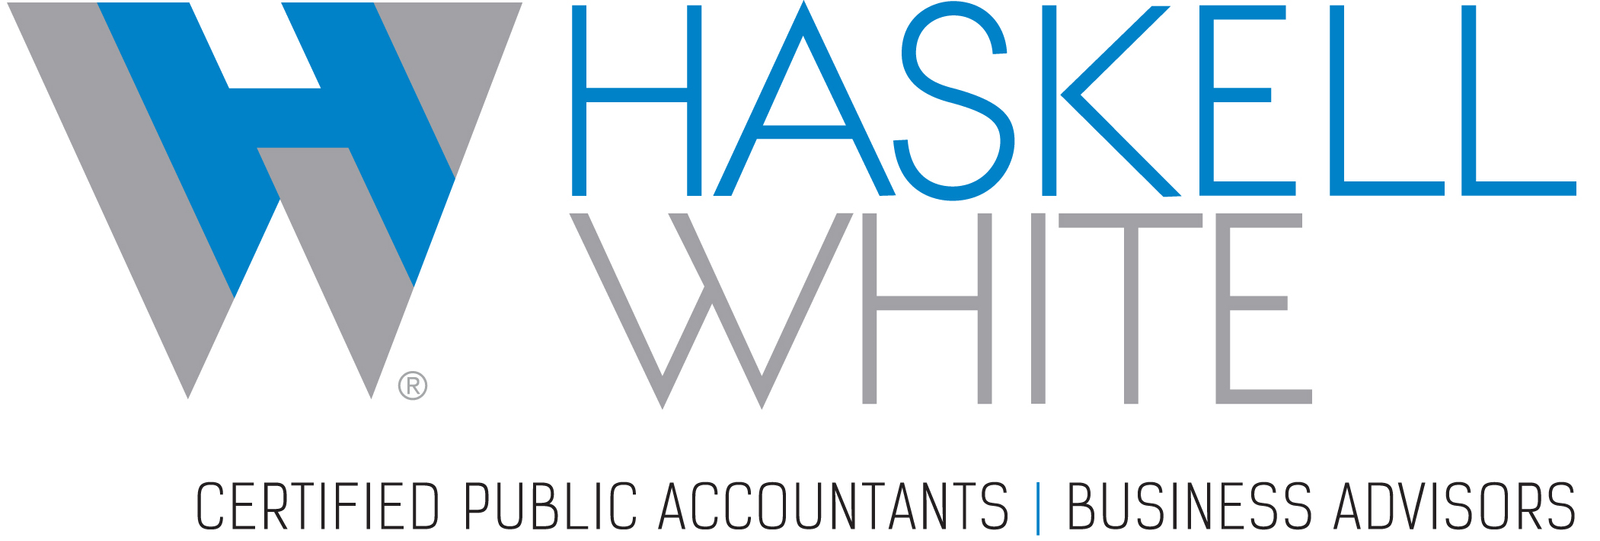 Haskell and White Logo